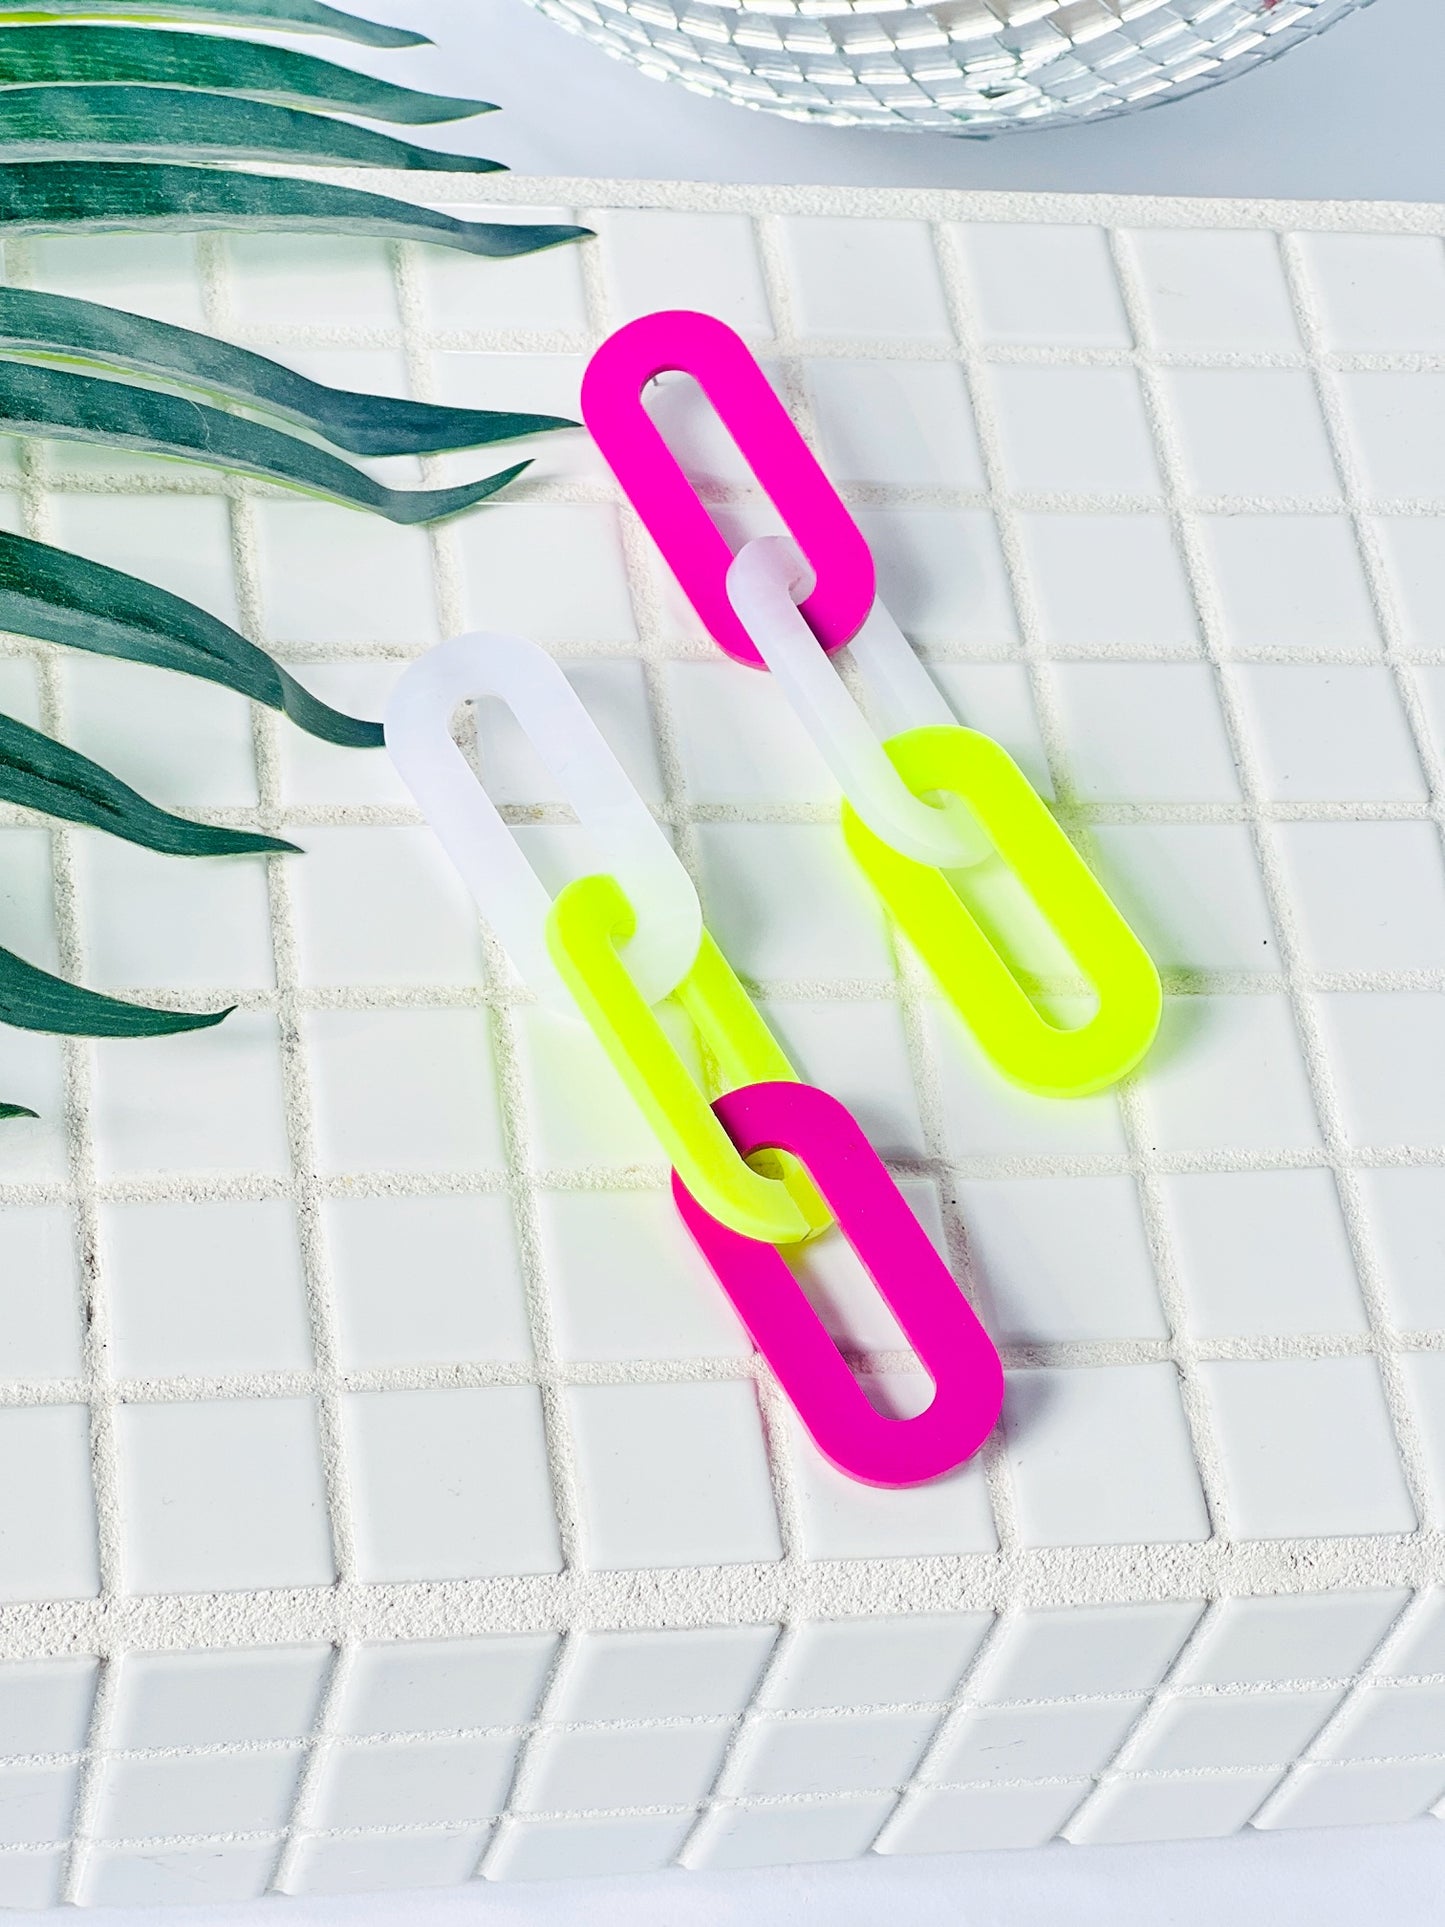 The Spano Earring in Frosted Lime, Marbled White, and Raspberry Acrylic